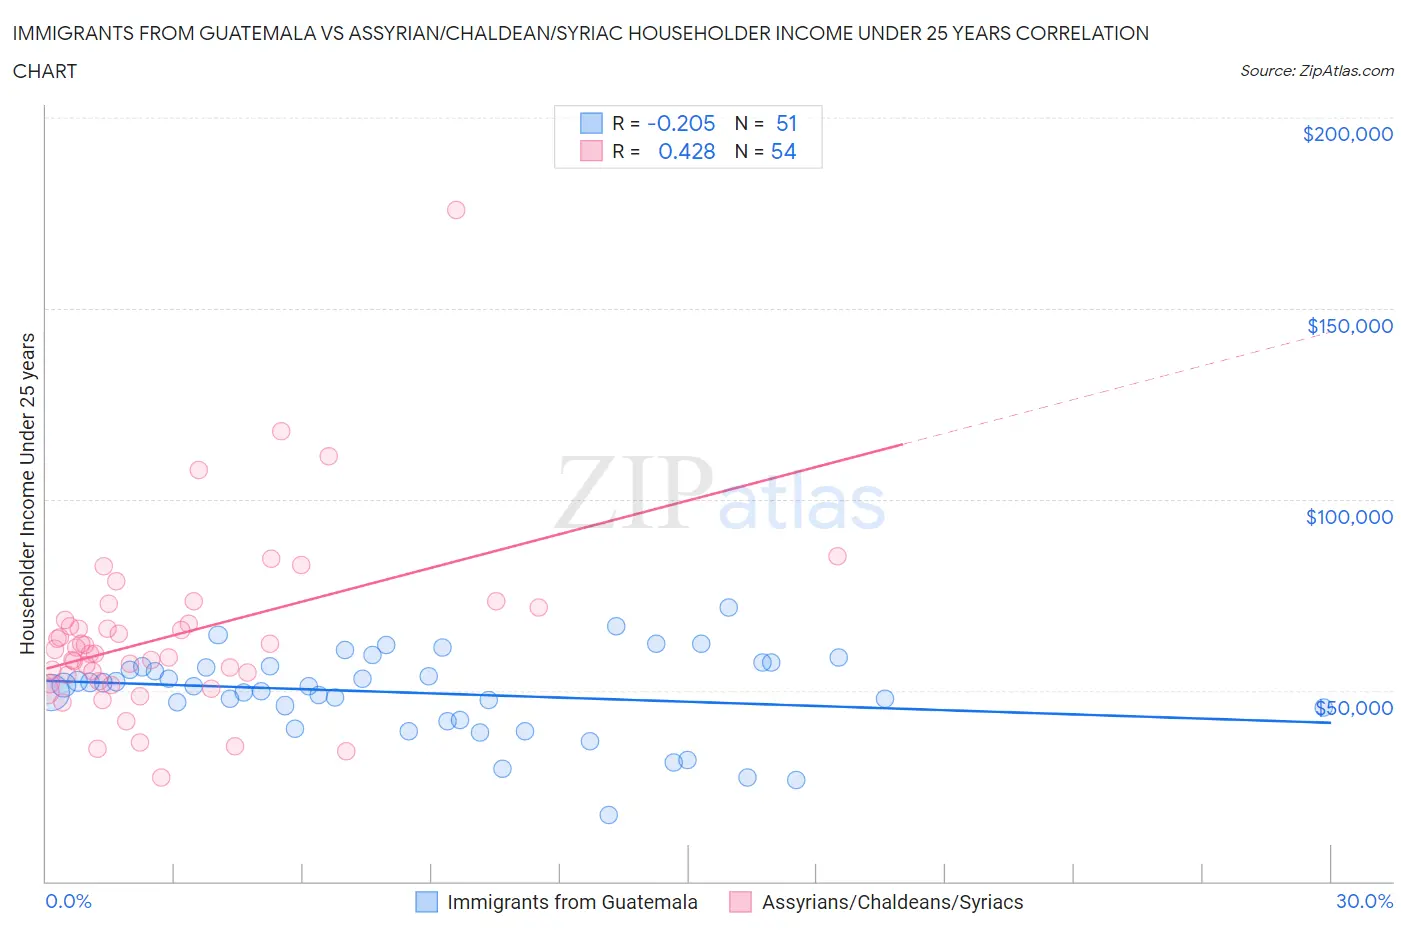 Immigrants from Guatemala vs Assyrian/Chaldean/Syriac Householder Income Under 25 years